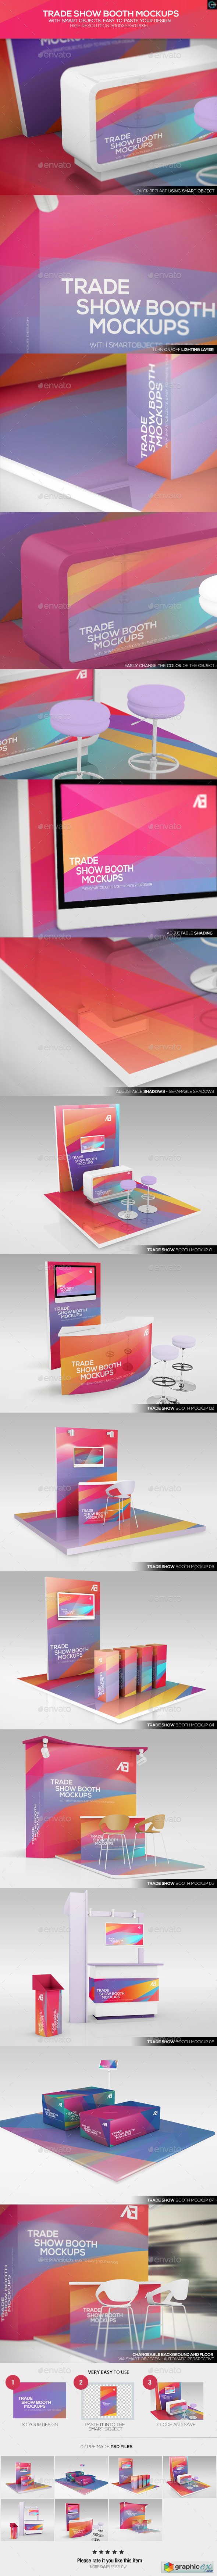 Trade Show Booth Mockups 11139823